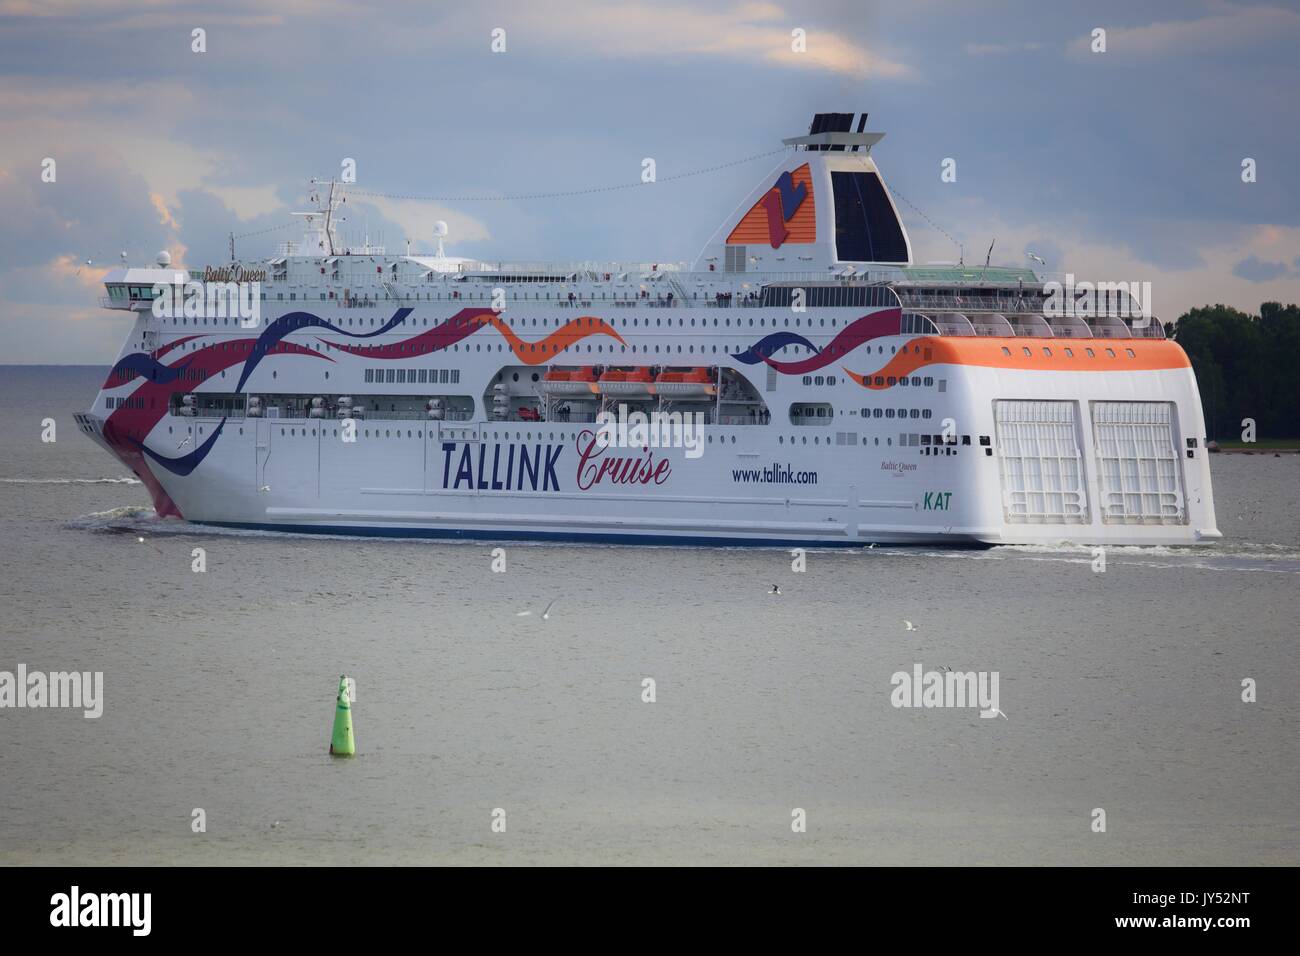 Tallink Cruise Baltic Queen High Resolution Stock Photography and Images -  Alamy